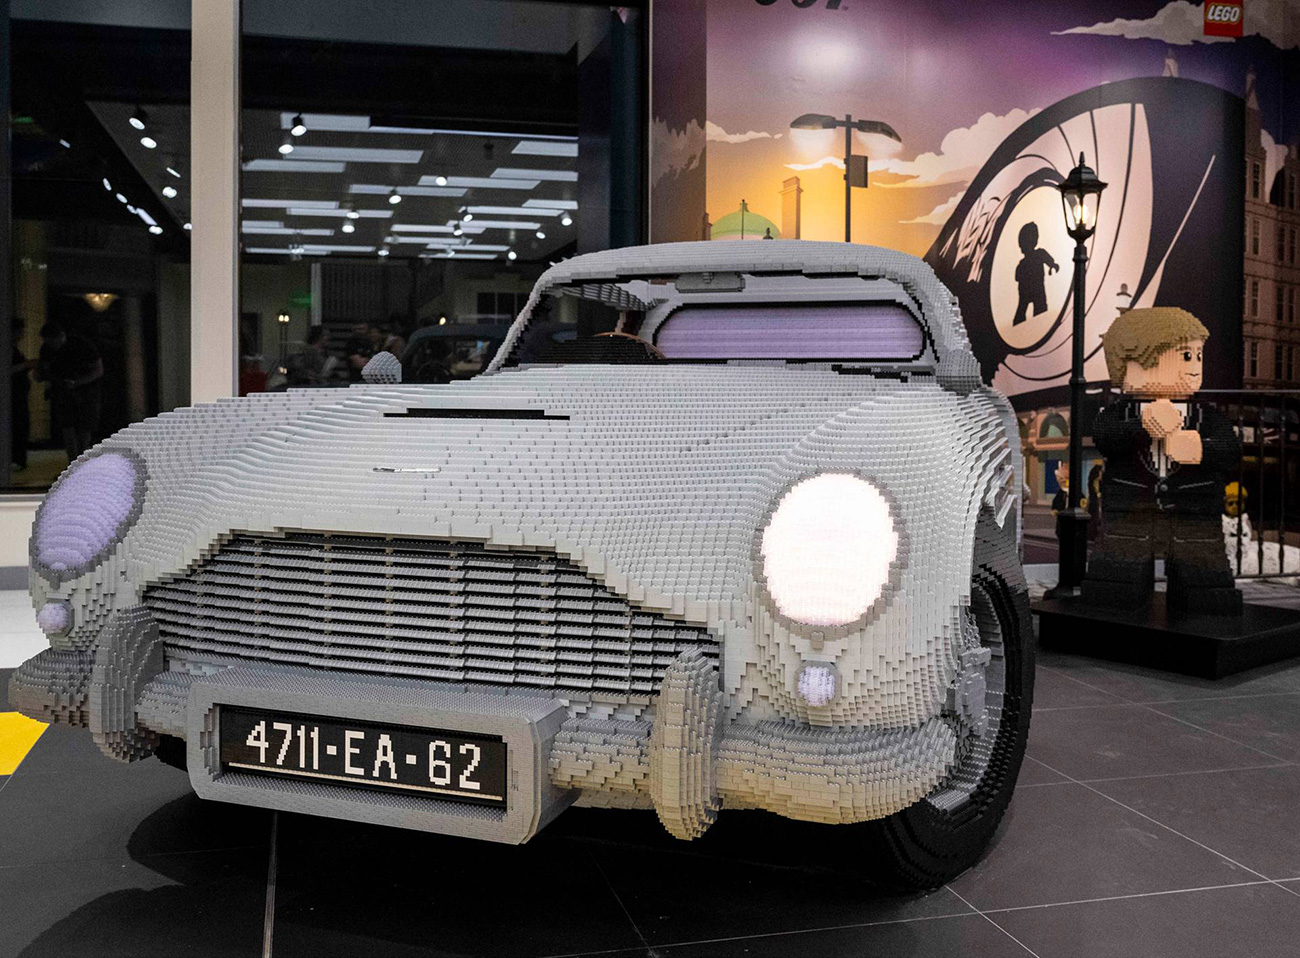 James Bond DB5 at LEGO Flagship London Store Leicester Square front